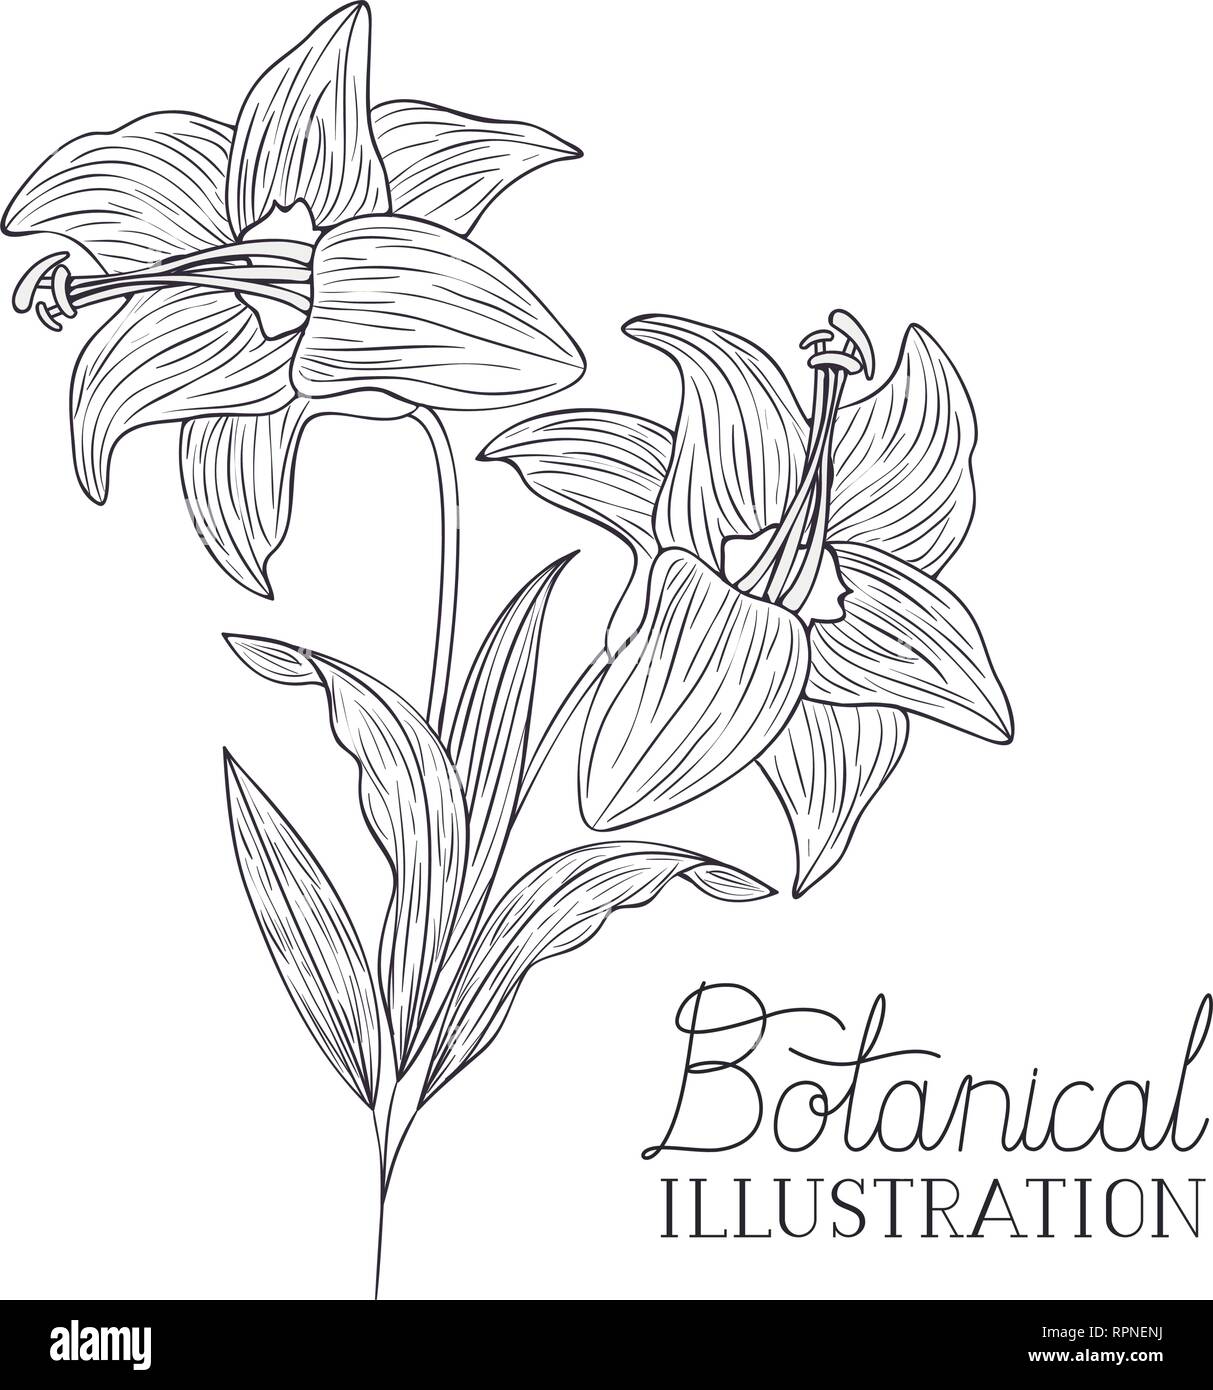 botanical illustration label with plant Stock Vector